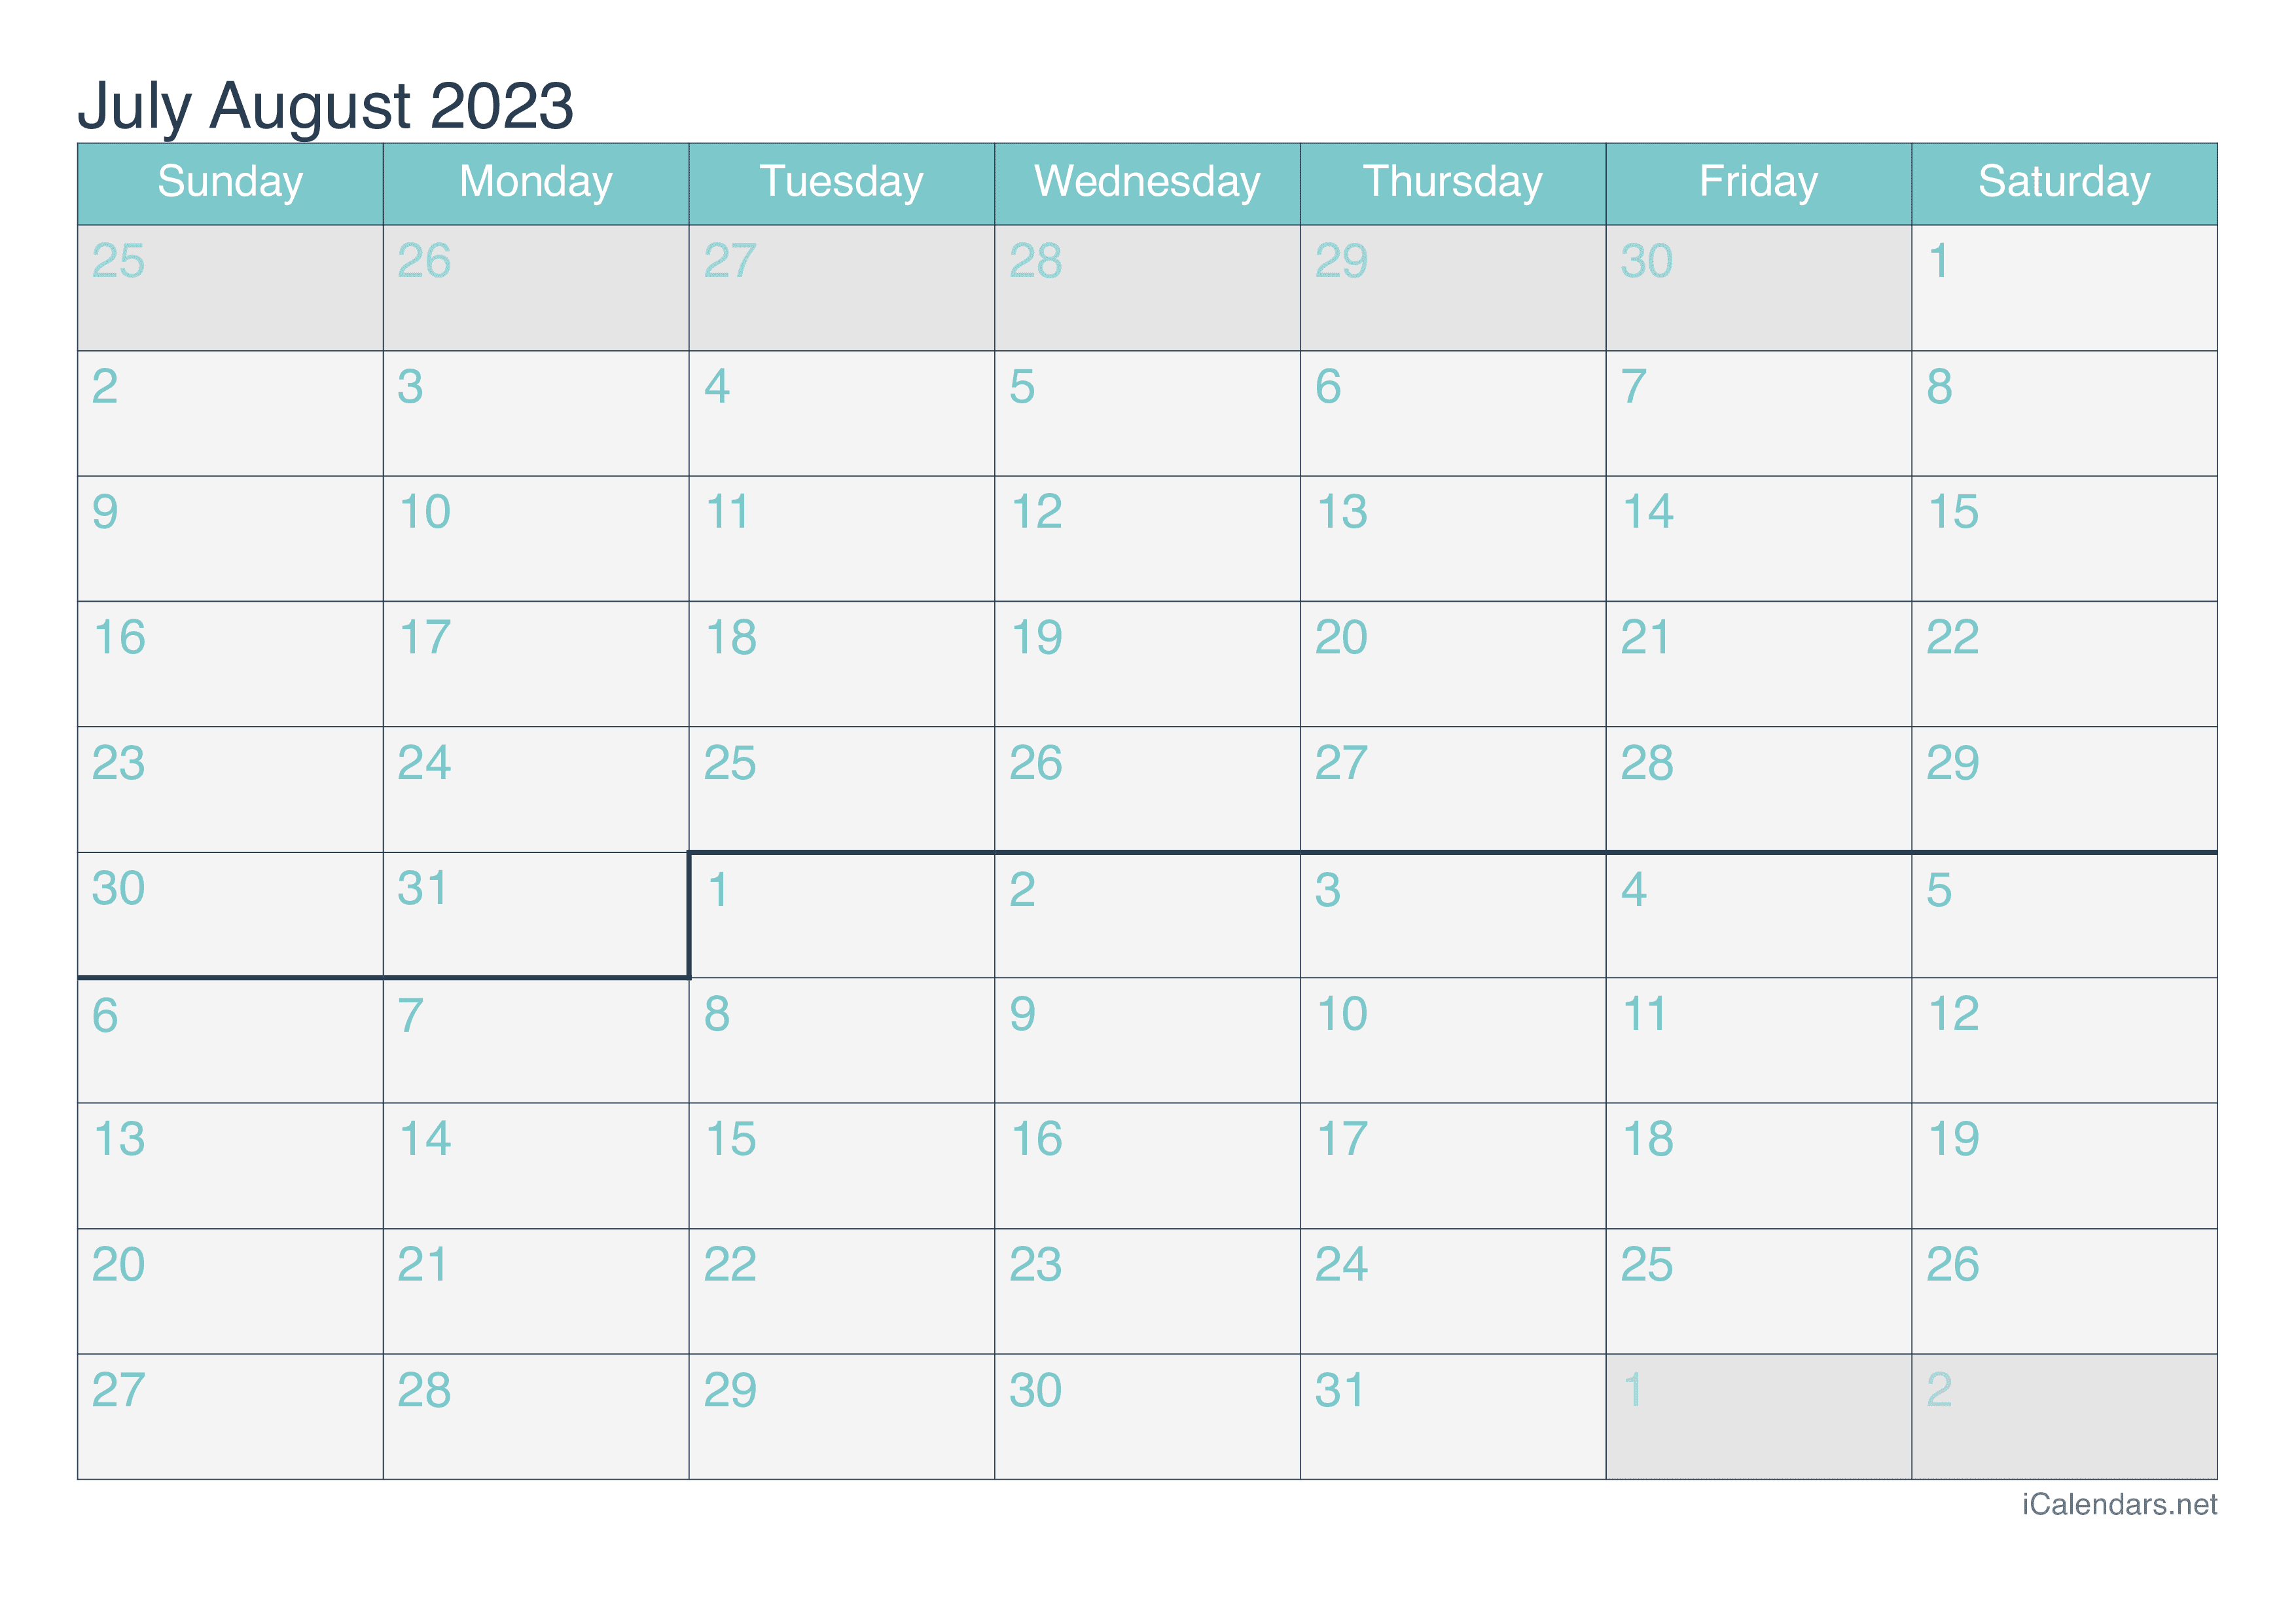 free-download-printable-july-2023-calendar-large-box-grid-space-for-notes